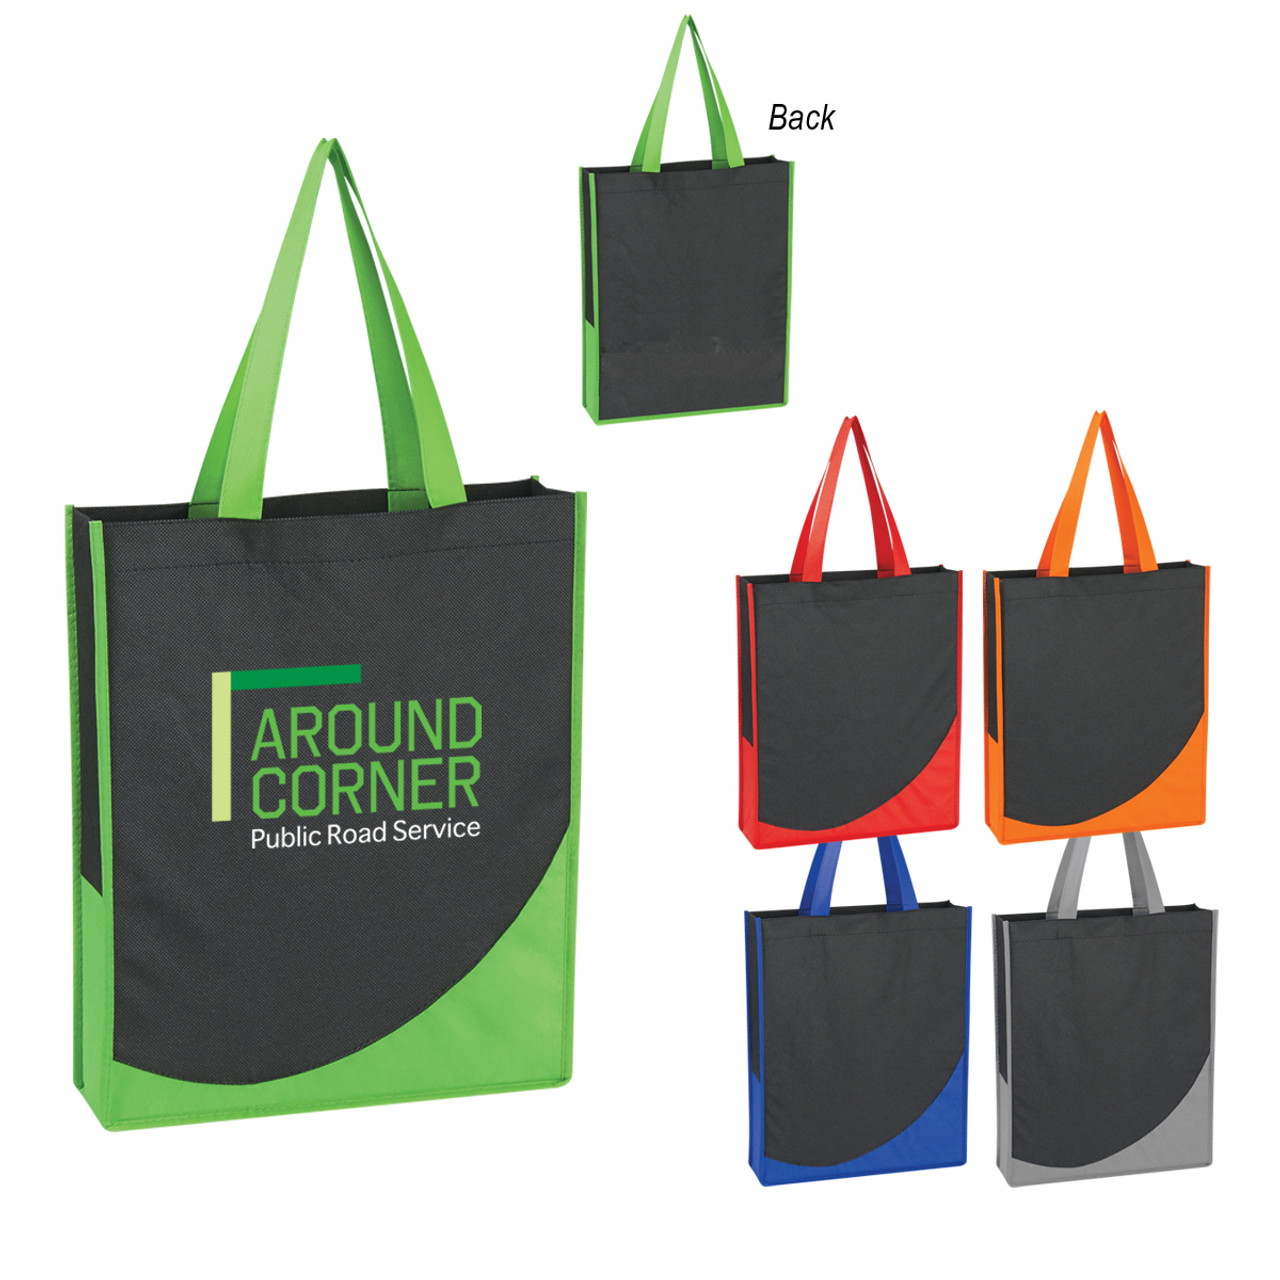 Wholesale Non Woven Tote Bags with Accent Trim | BagzDepot